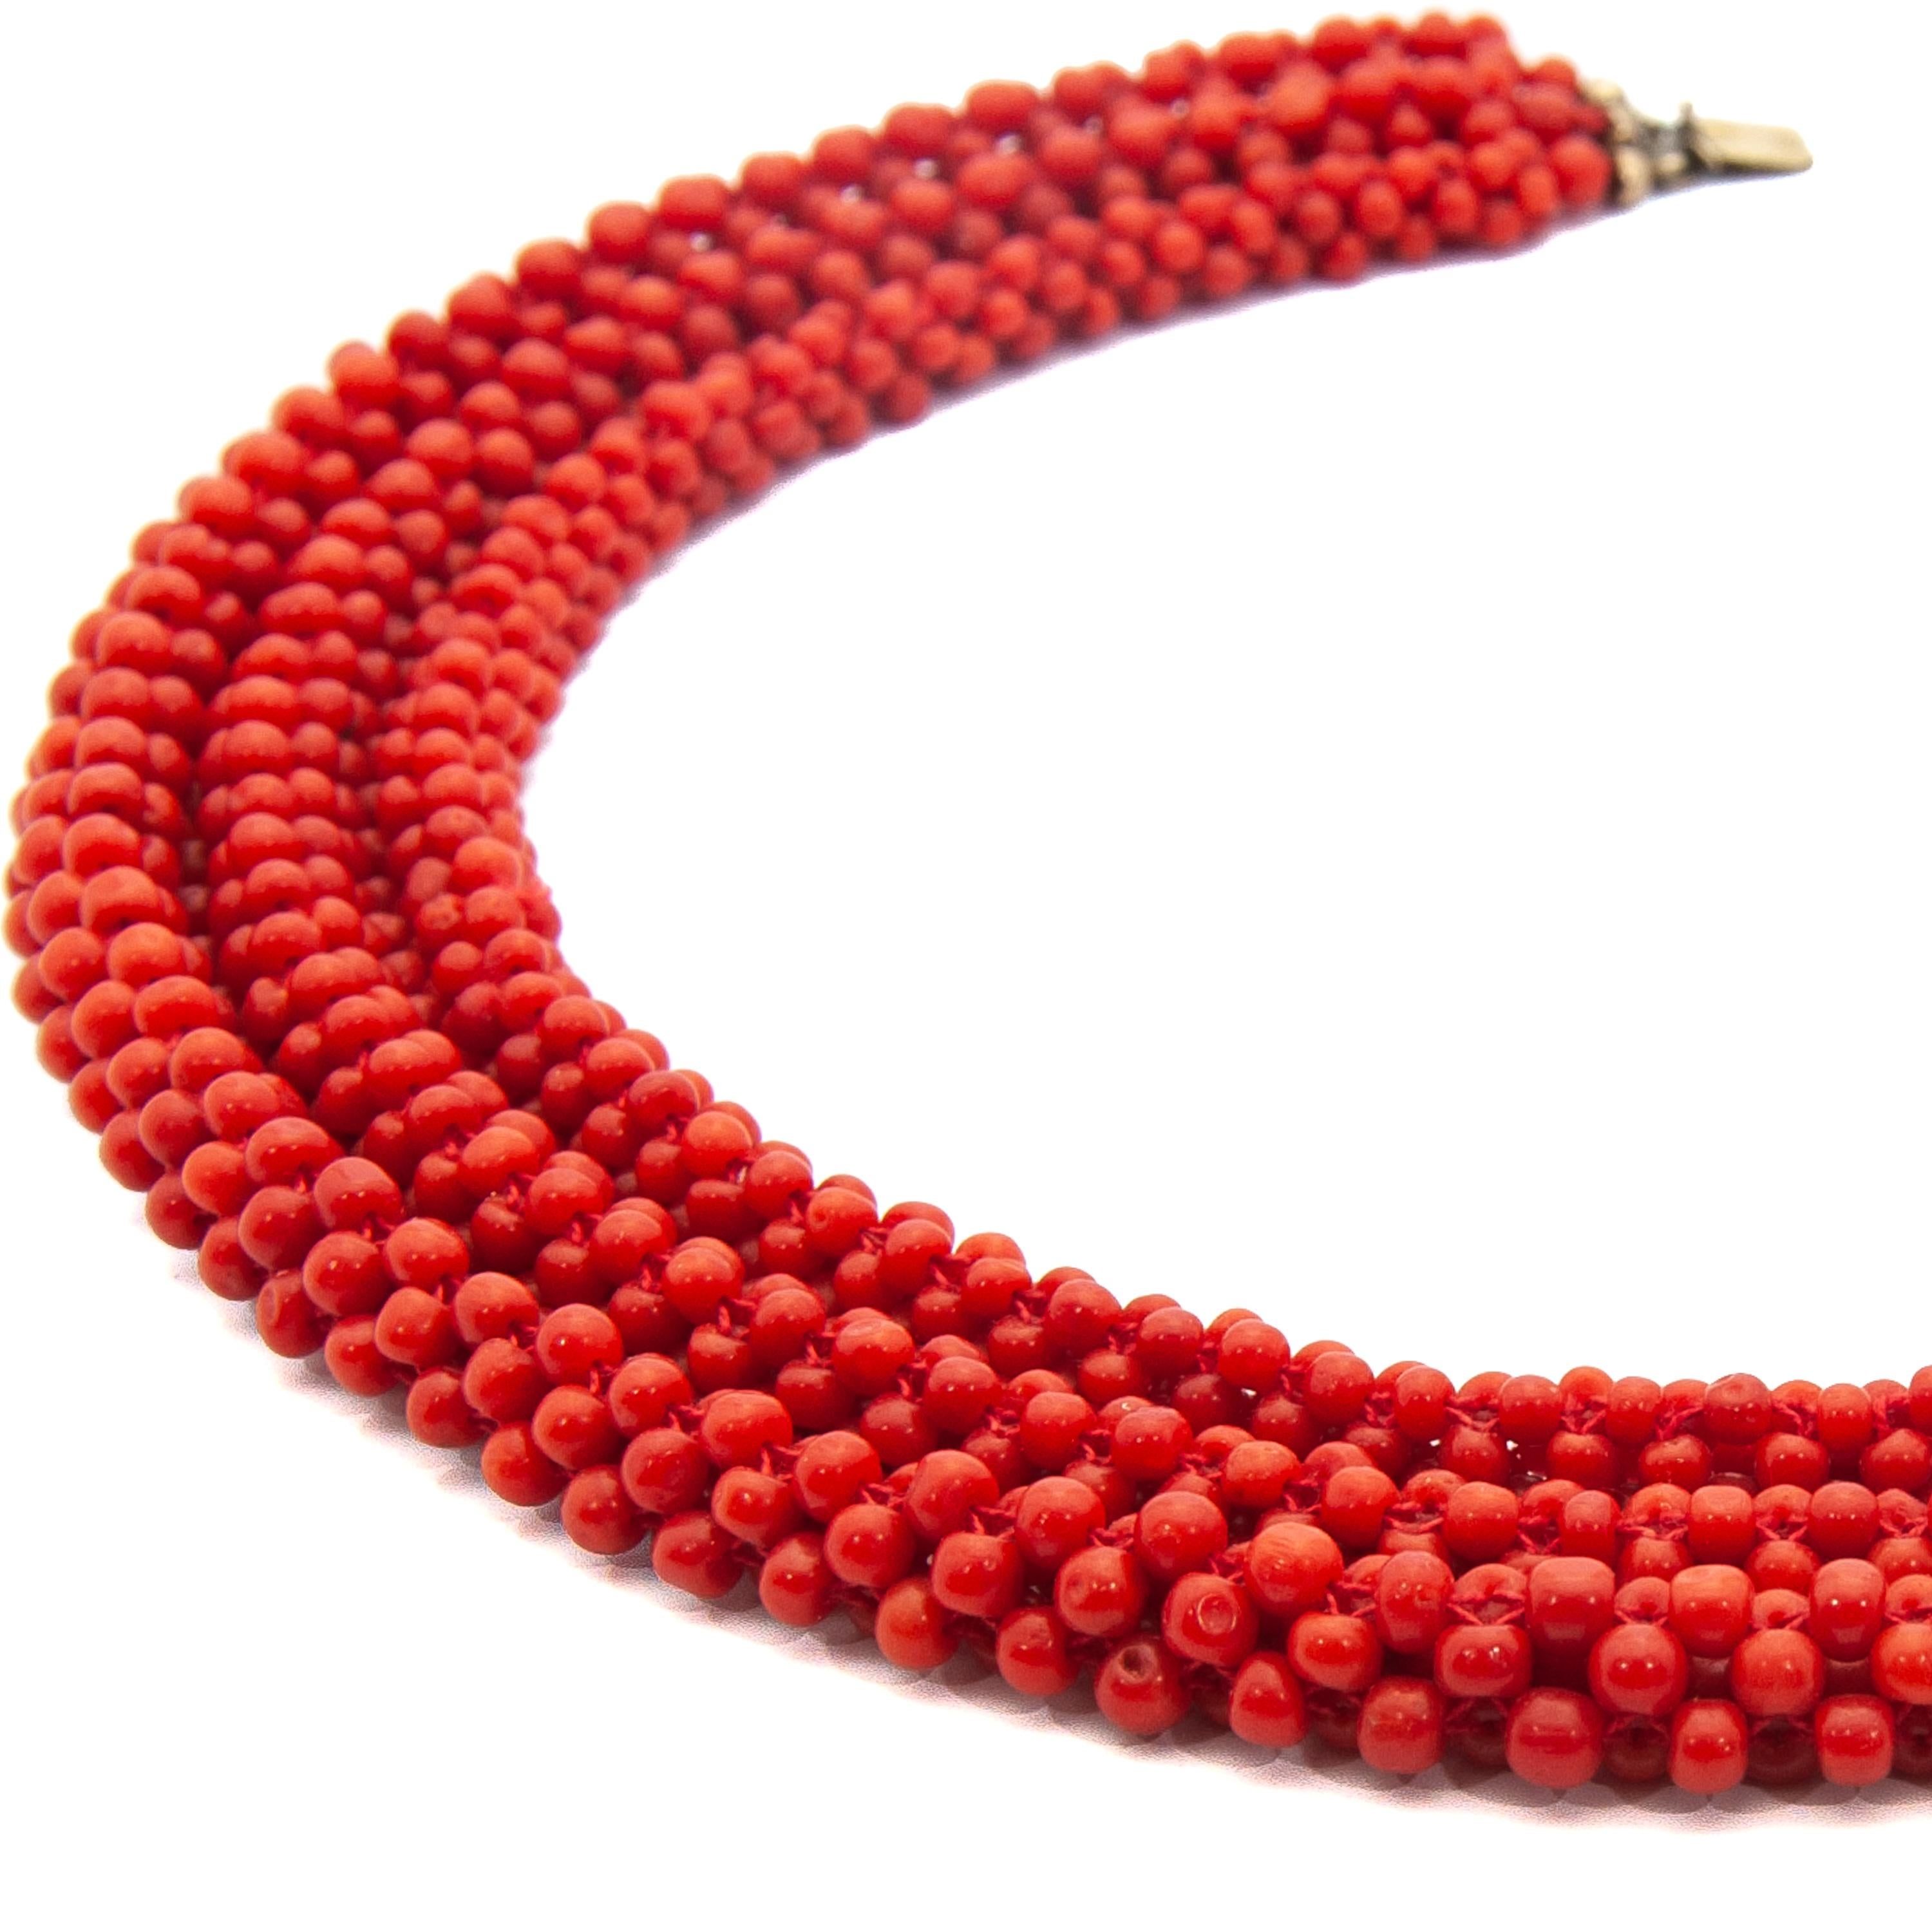 bead necklace red